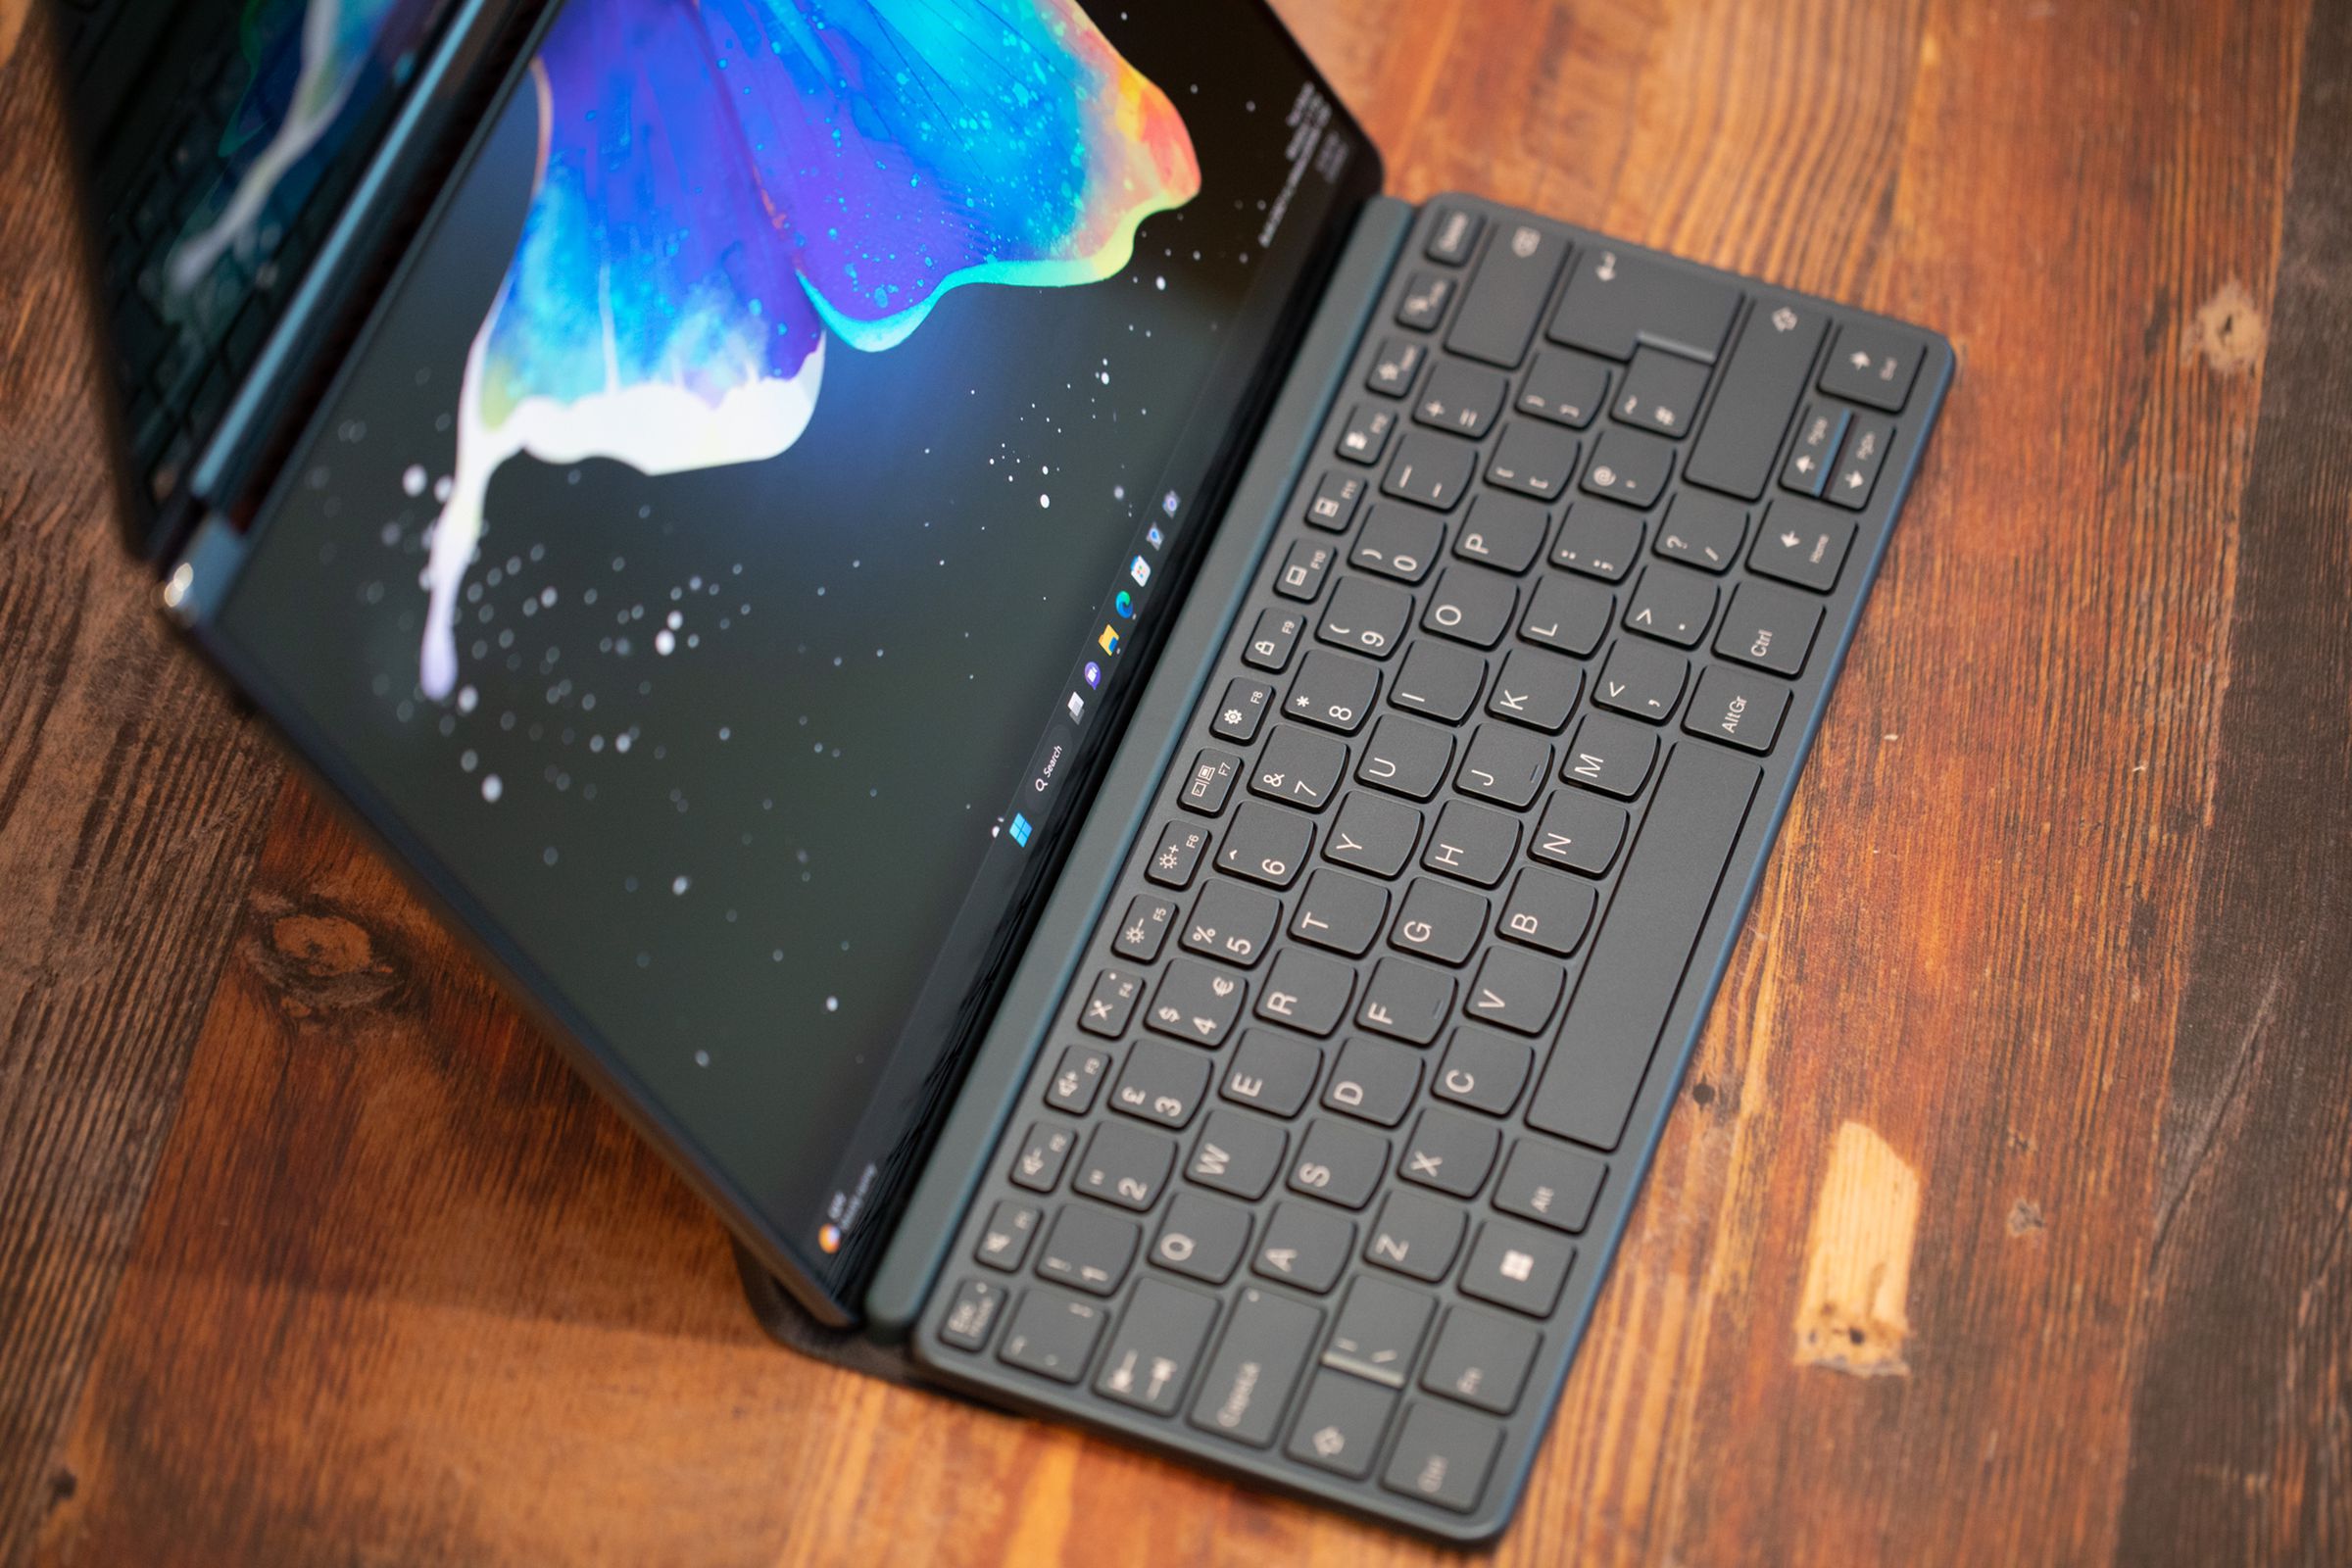 The keyboard is attached to the Lenovo Yoga Book 9i in portrait mode.